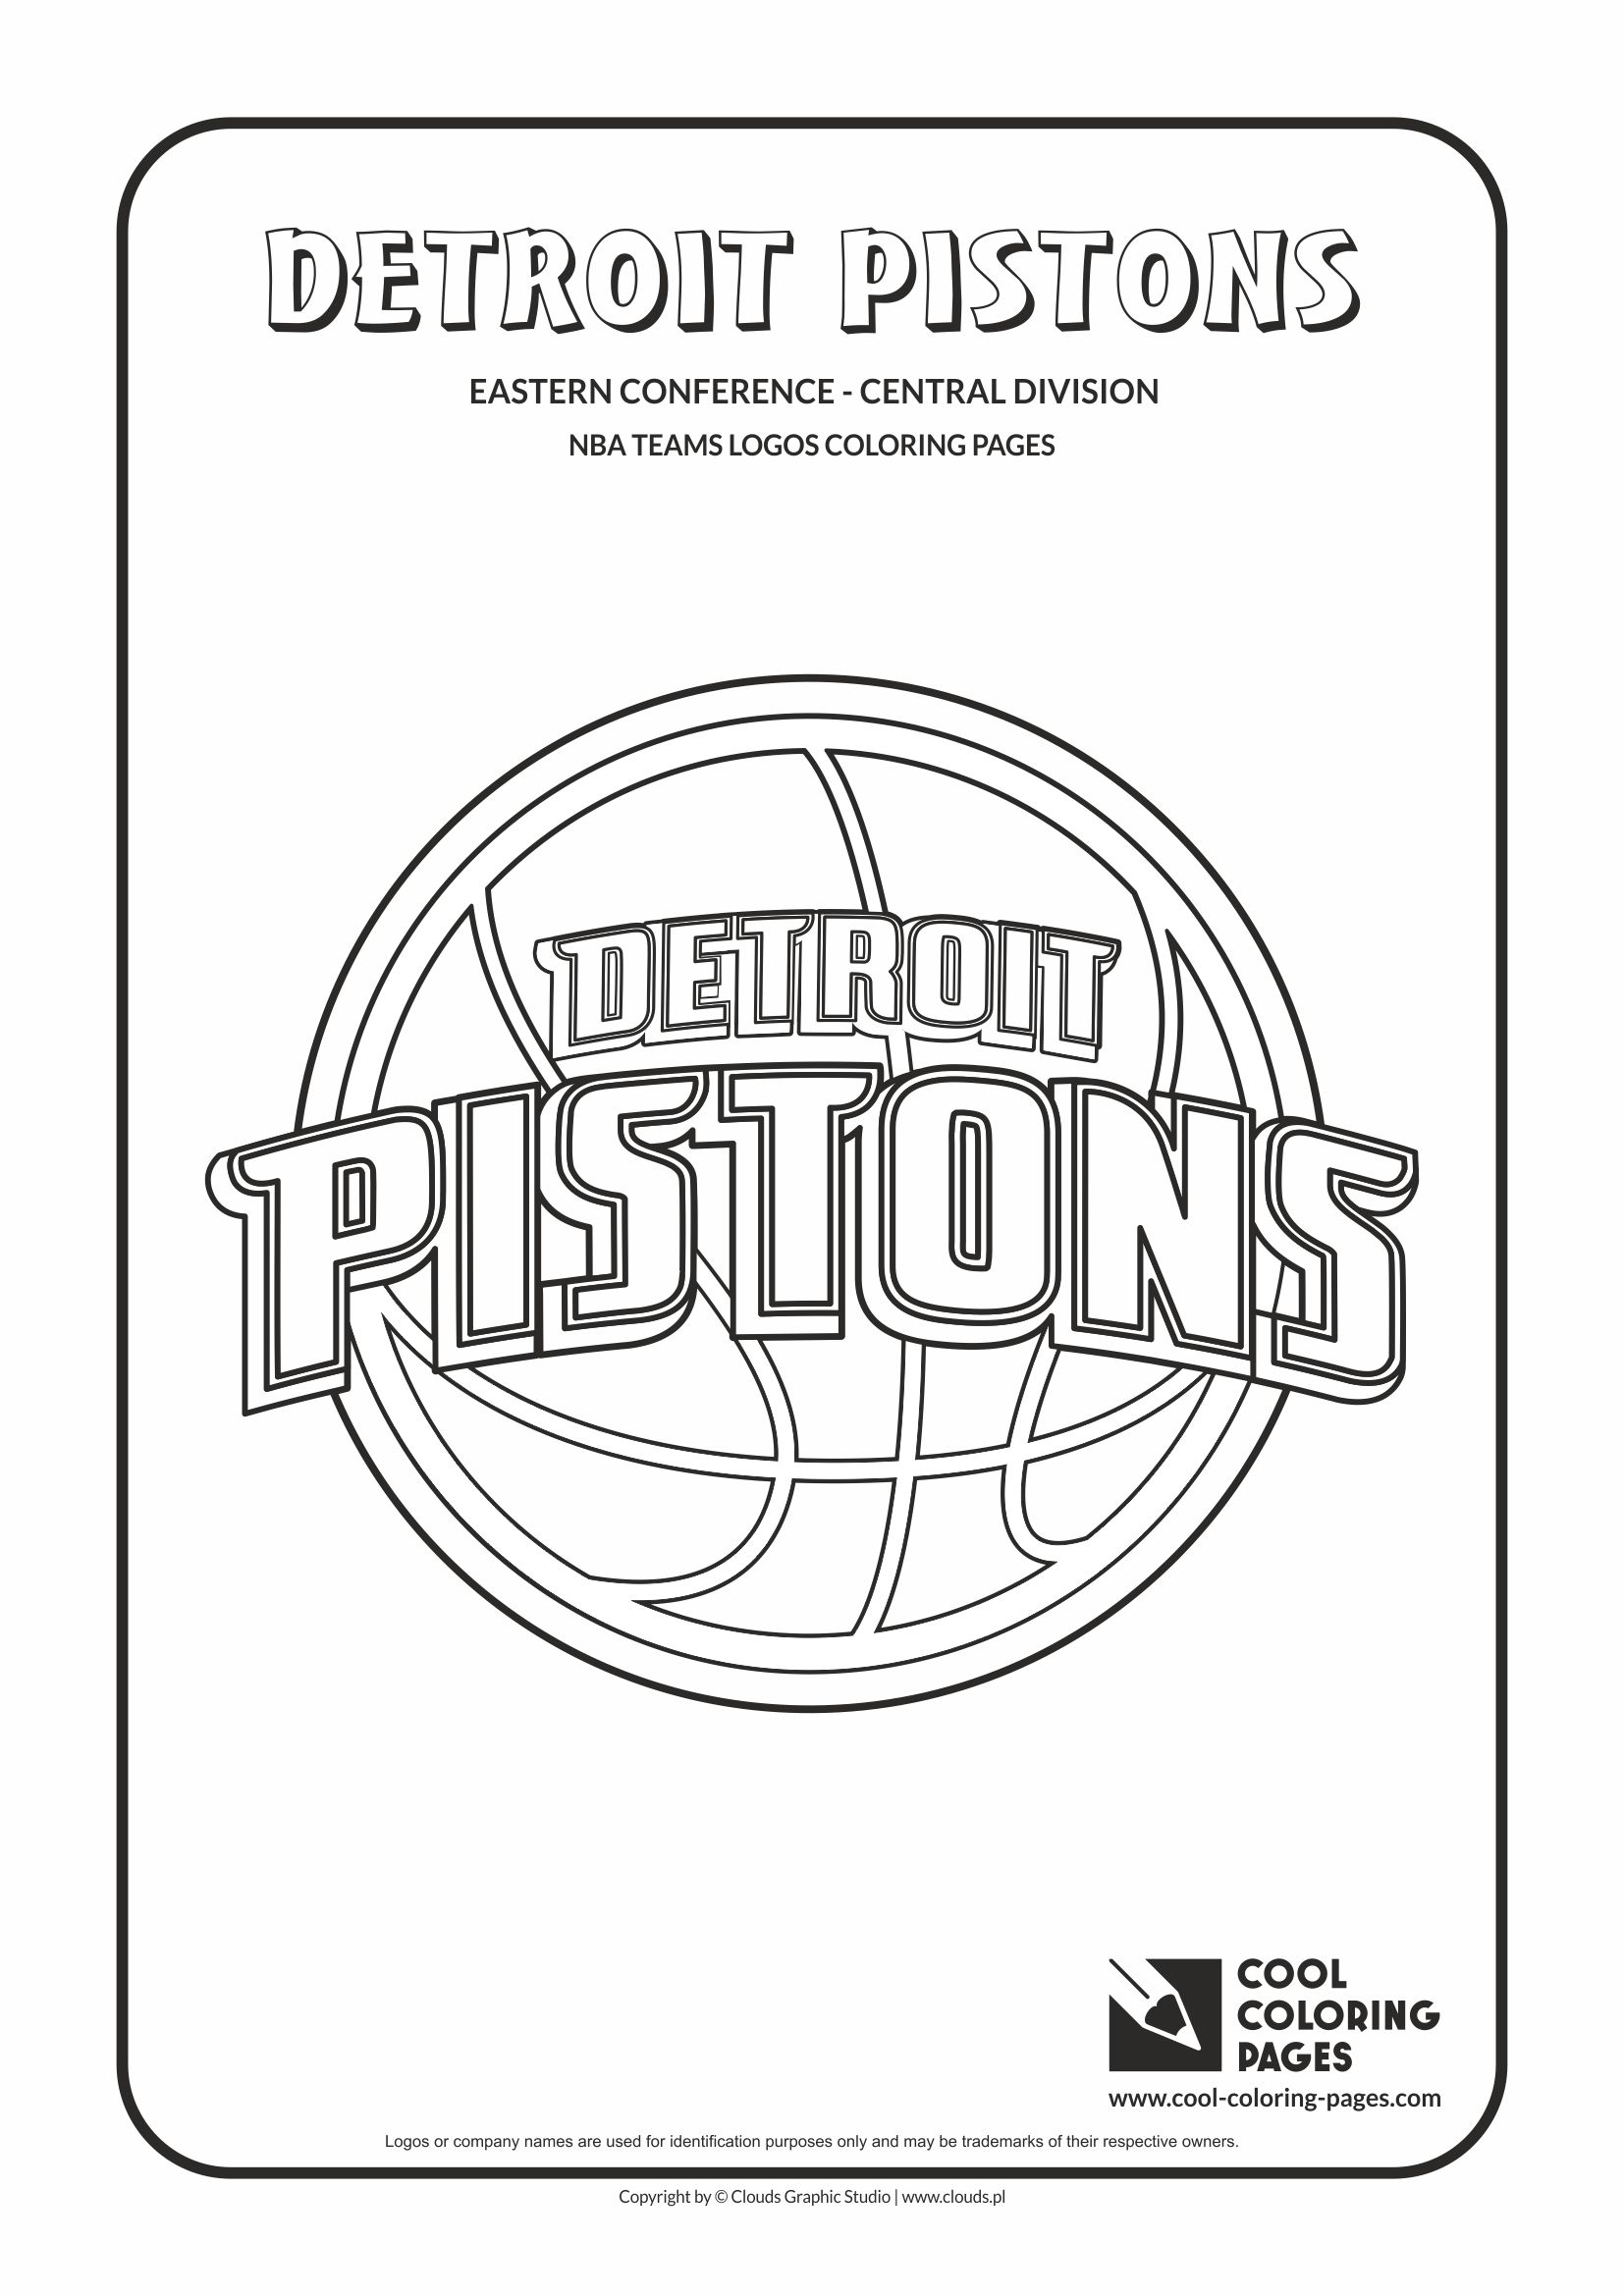 Cool Coloring Pages NBA teams logos coloring pages - Cool Coloring